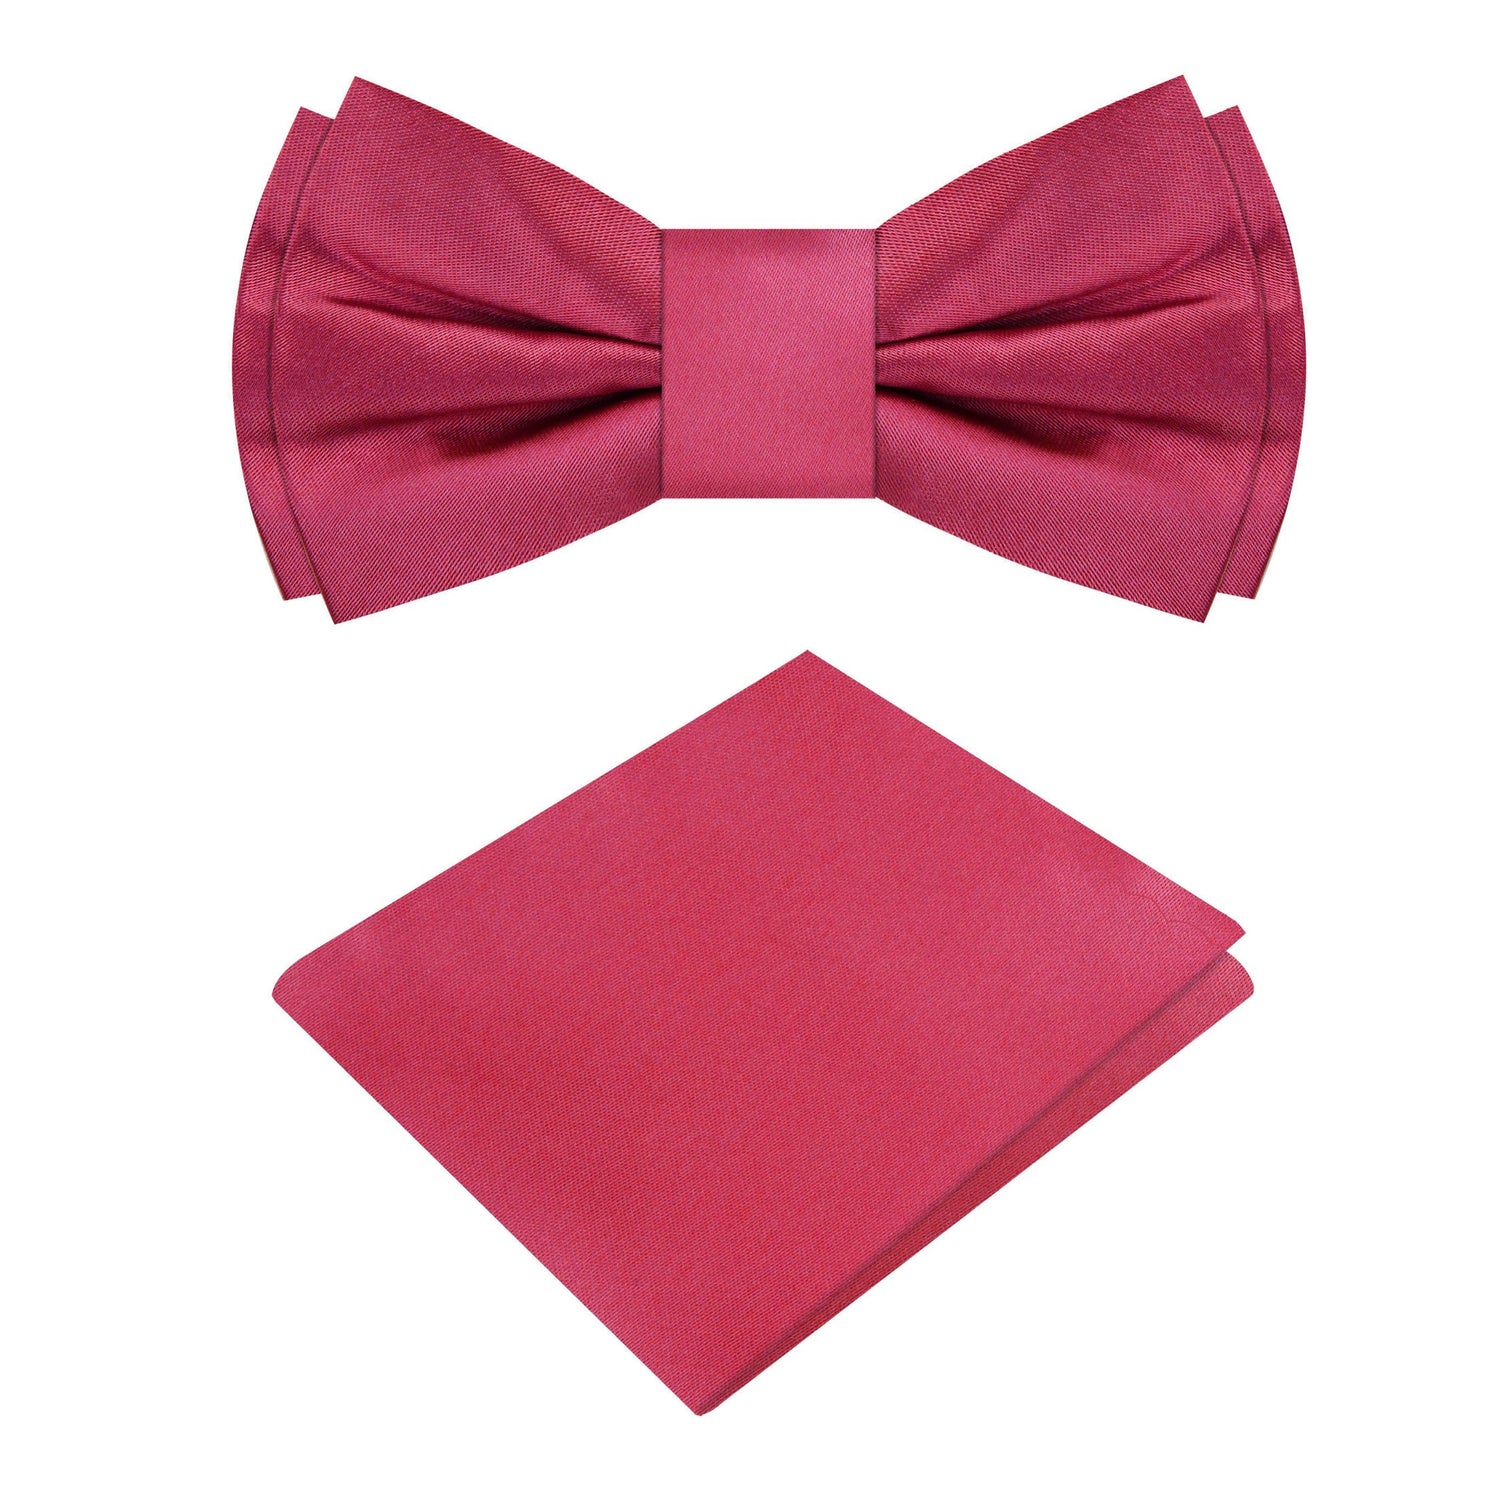 Raspberry Bow Tie with Green and Pocket Square View 2